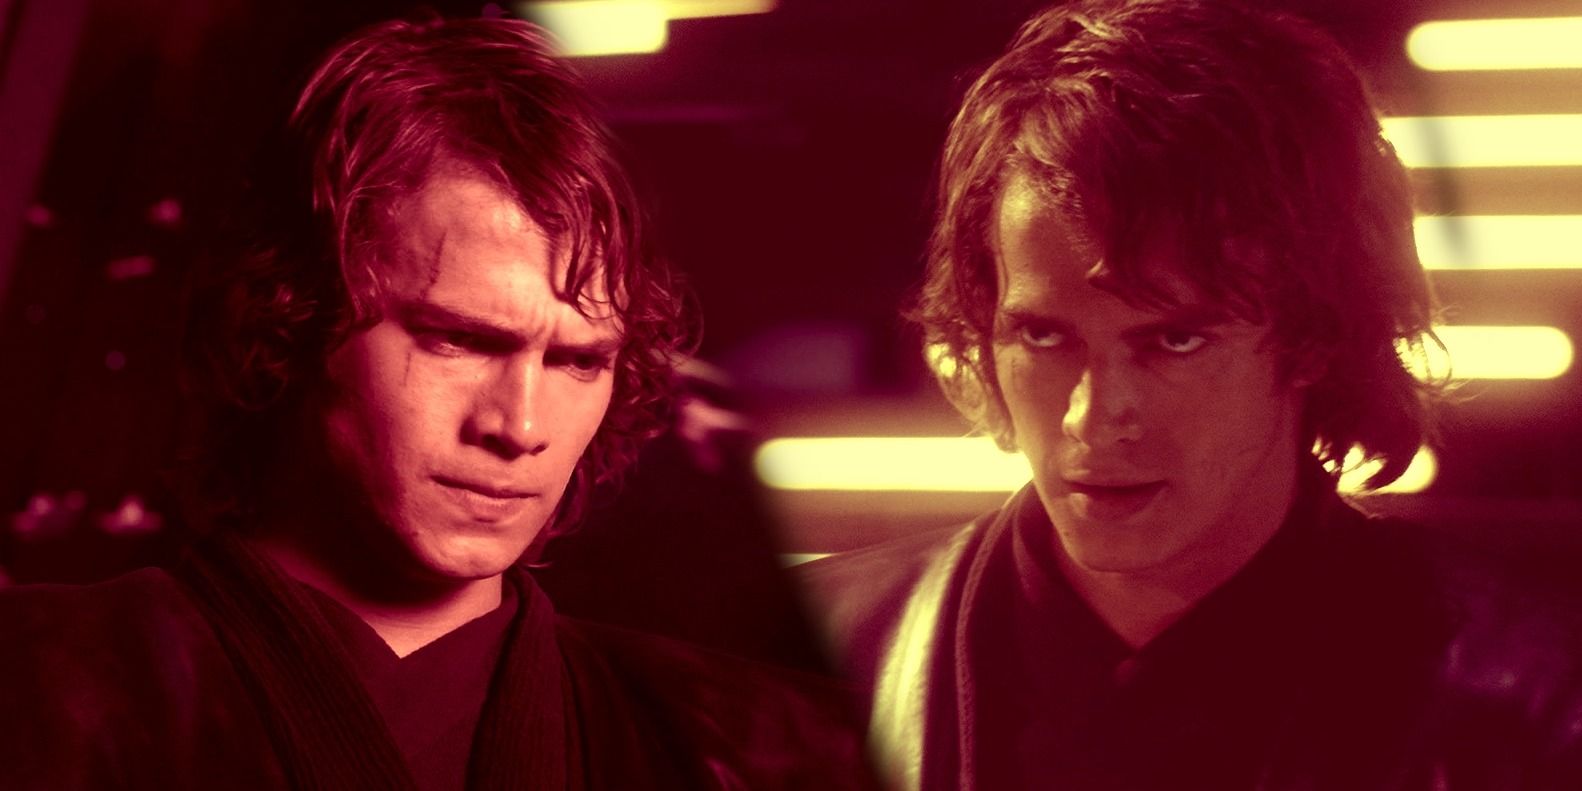 Two Images of Anakin Skywalker in Star Wars Revenge of the Sith